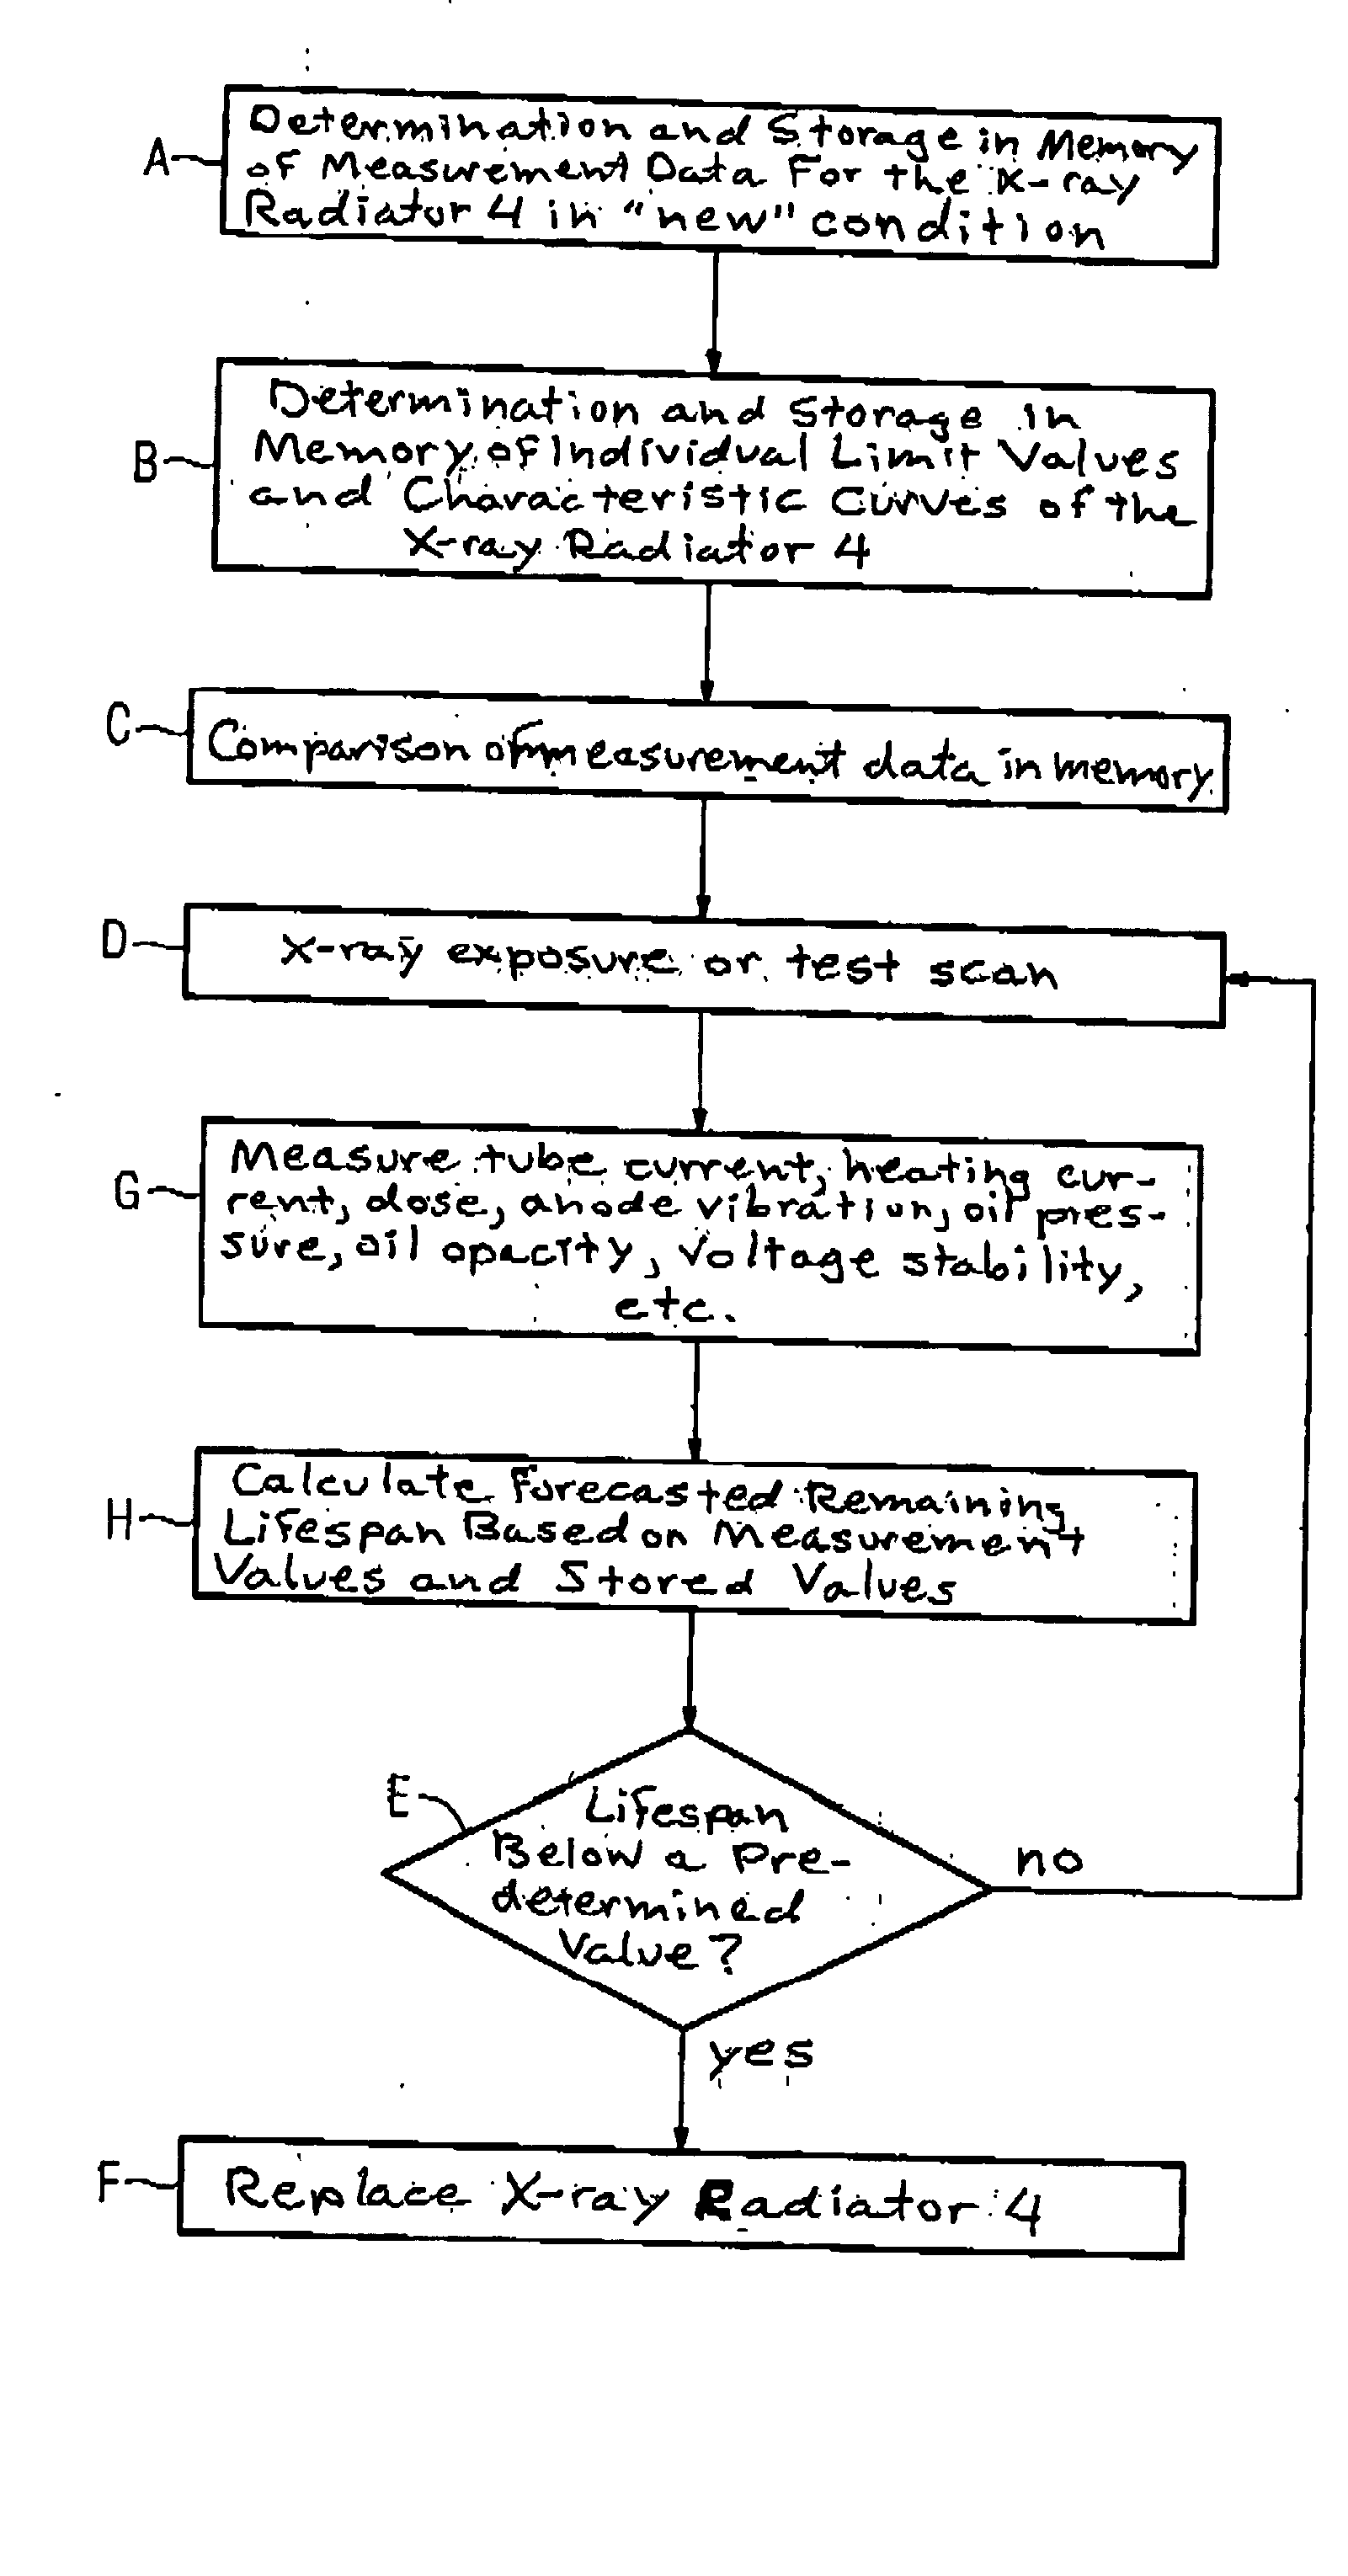 Method for estimating the remaining life span of an X-ray radiator